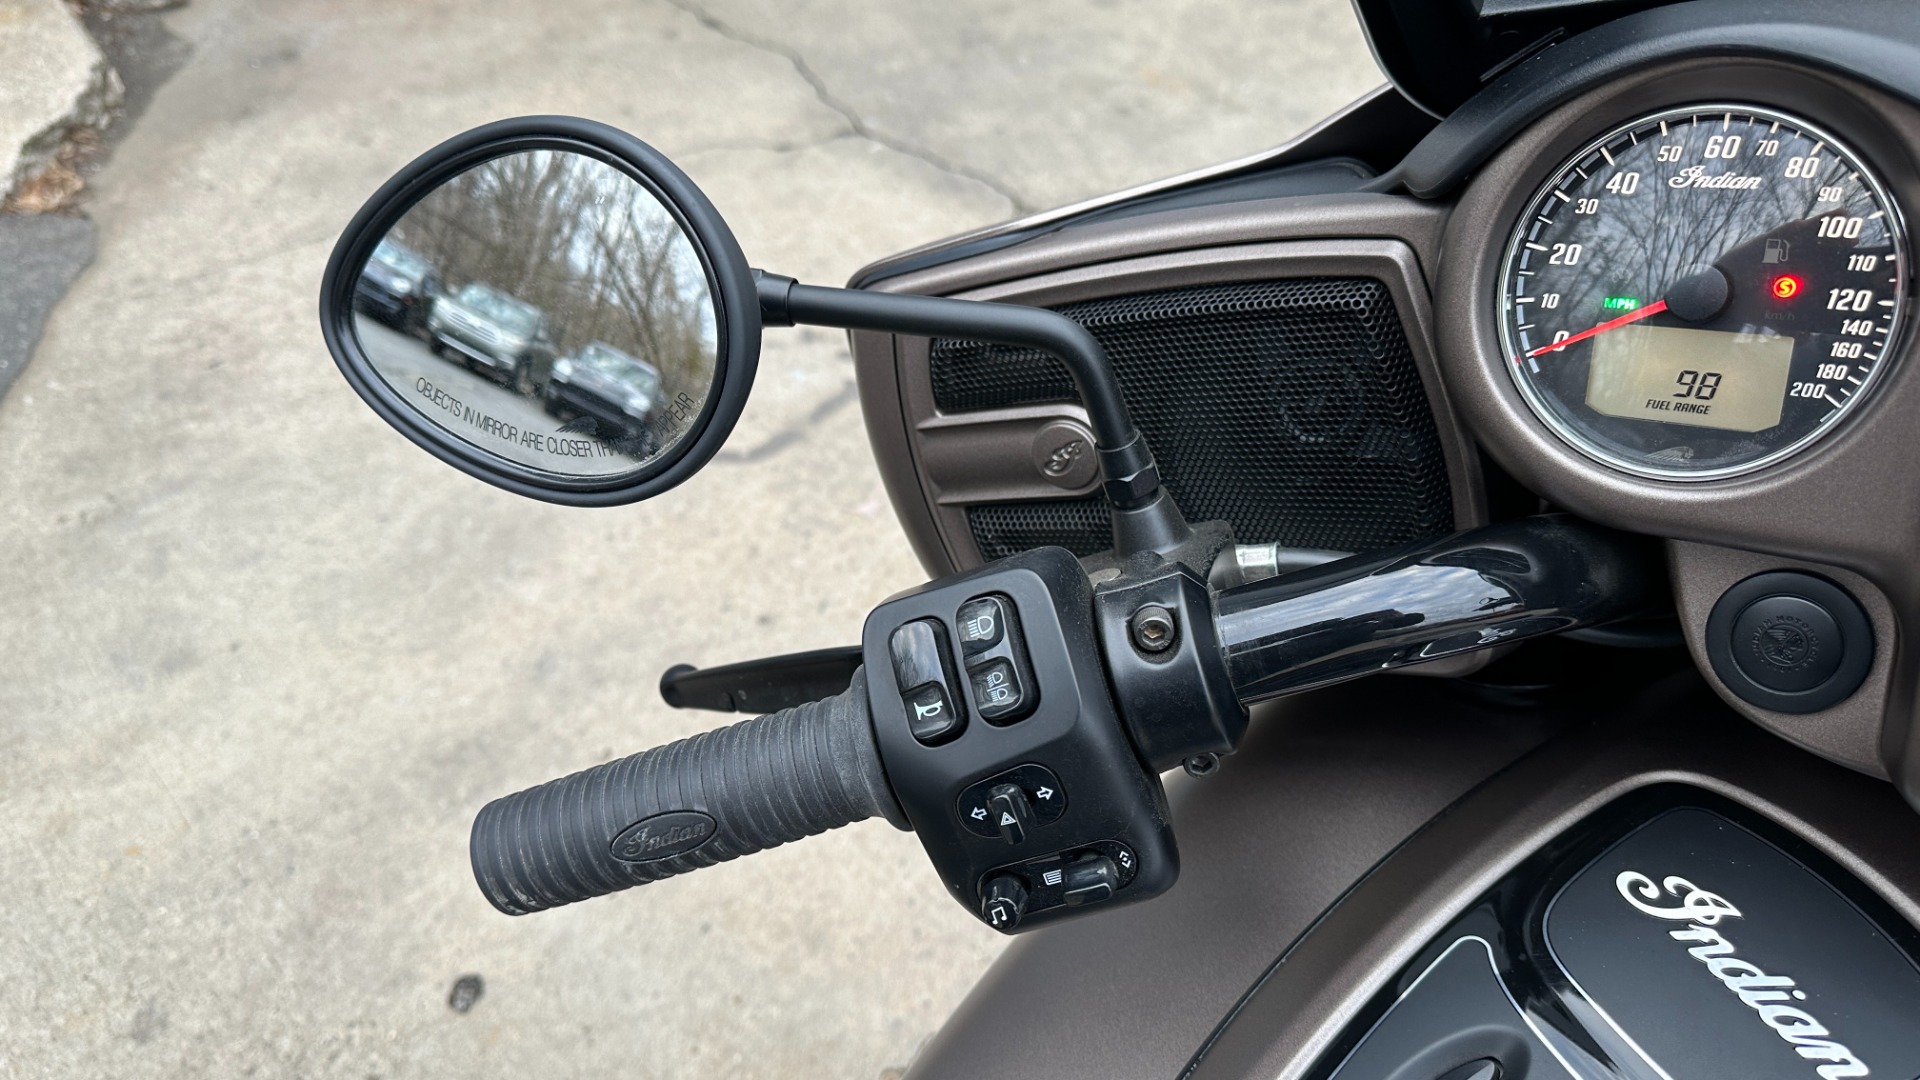 Used 2019 INDIAN CHIEFTAIN DARK HORSE / MATTE PAINT / LOW MILES / NAV / CRUISE CONTROL / TOUCHSCREEN for sale Sold at Formula Imports in Charlotte NC 28227 18